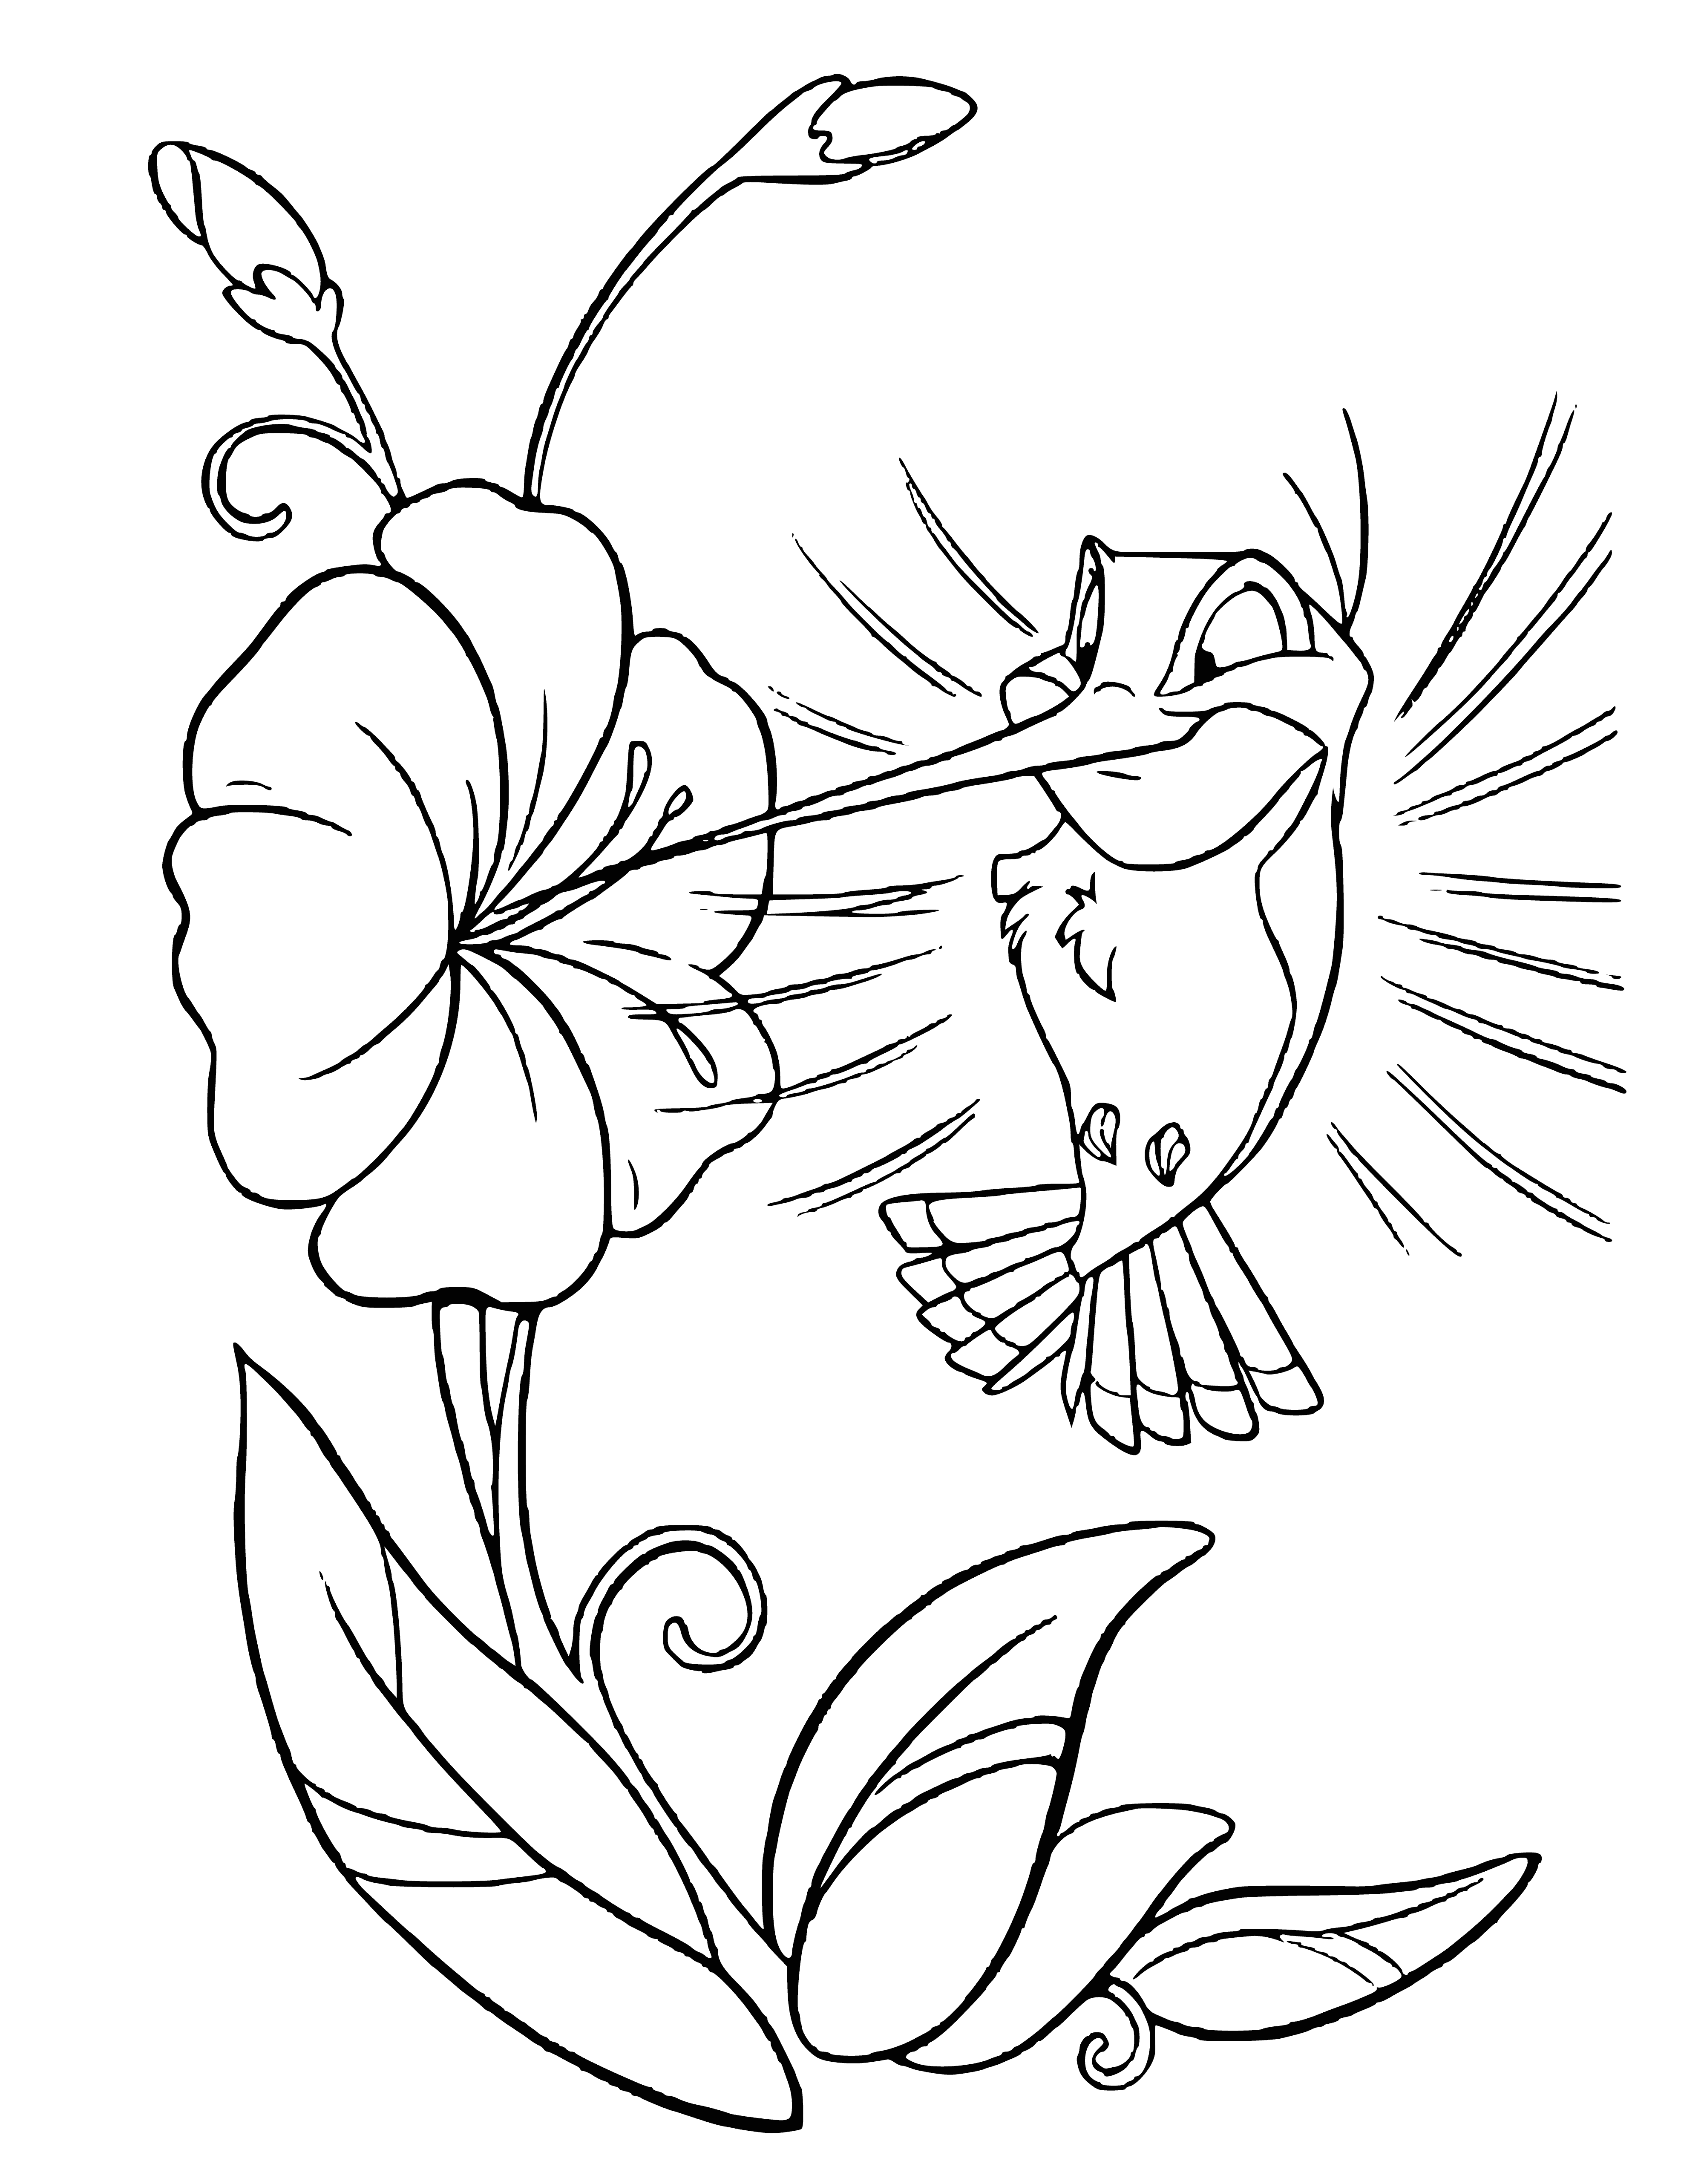 coloring page: Two blue hummingbirds with green accents, curved beaks and black eyes fly side-by-side on this coloring page.